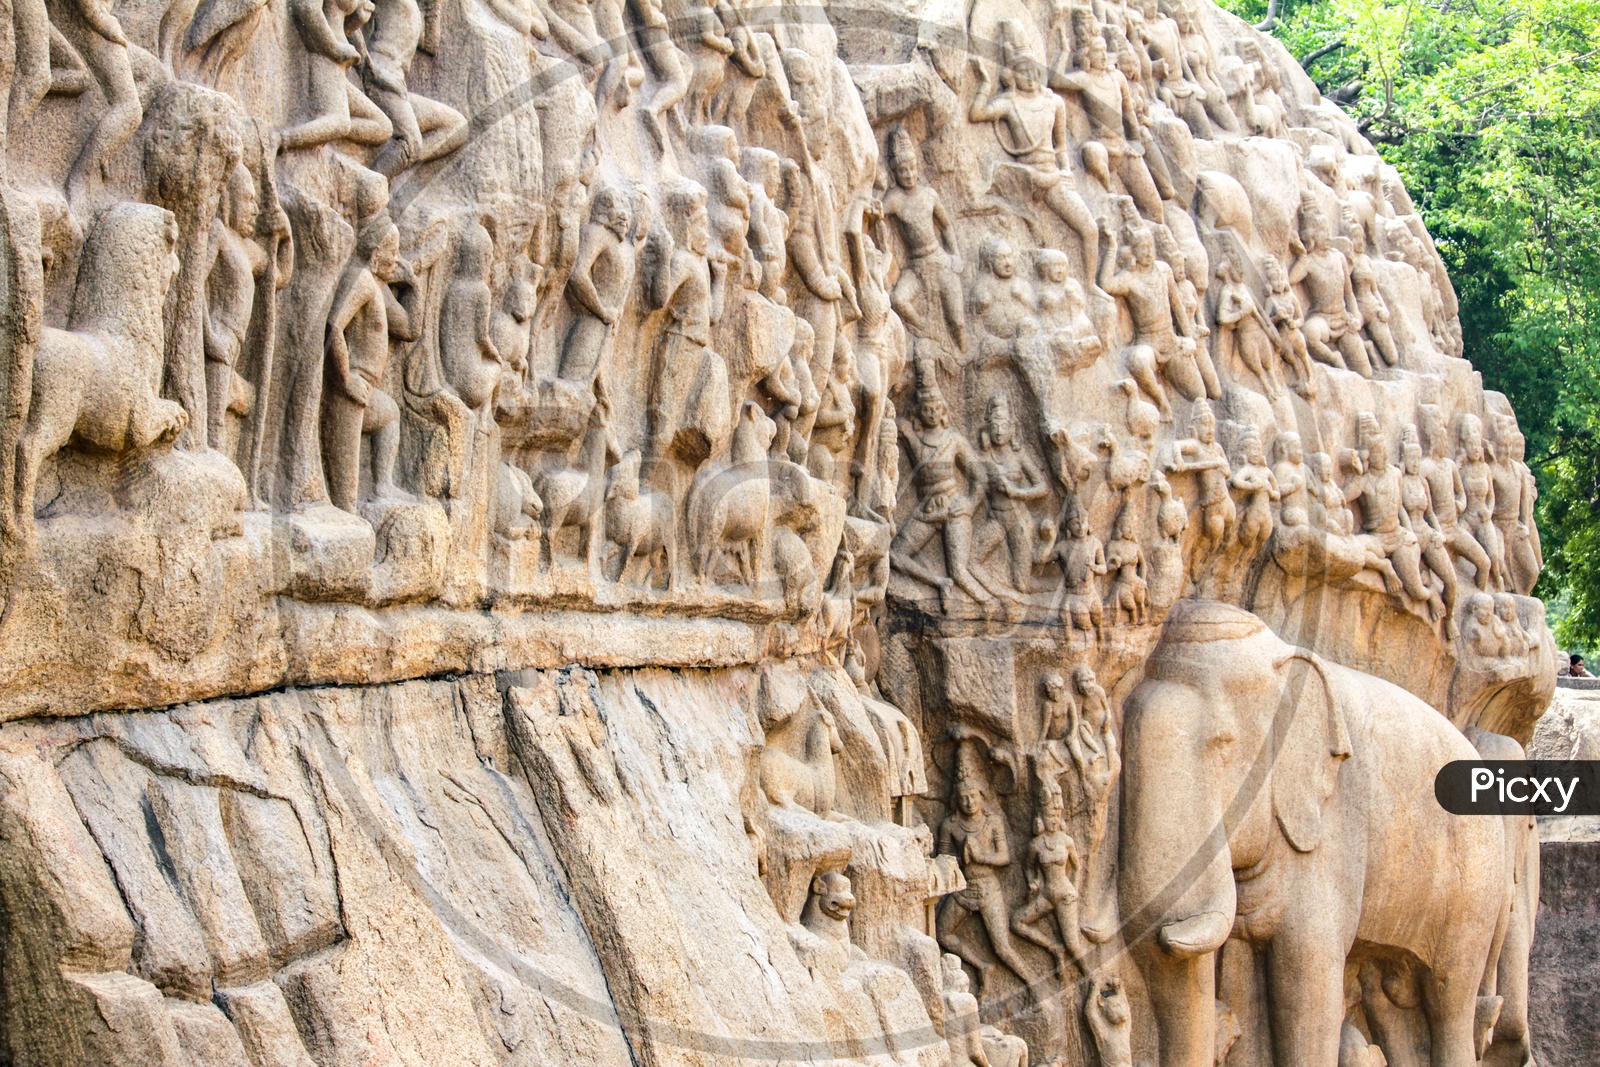 Sculptures at The Descent of the Ganges in Mahabalipuram